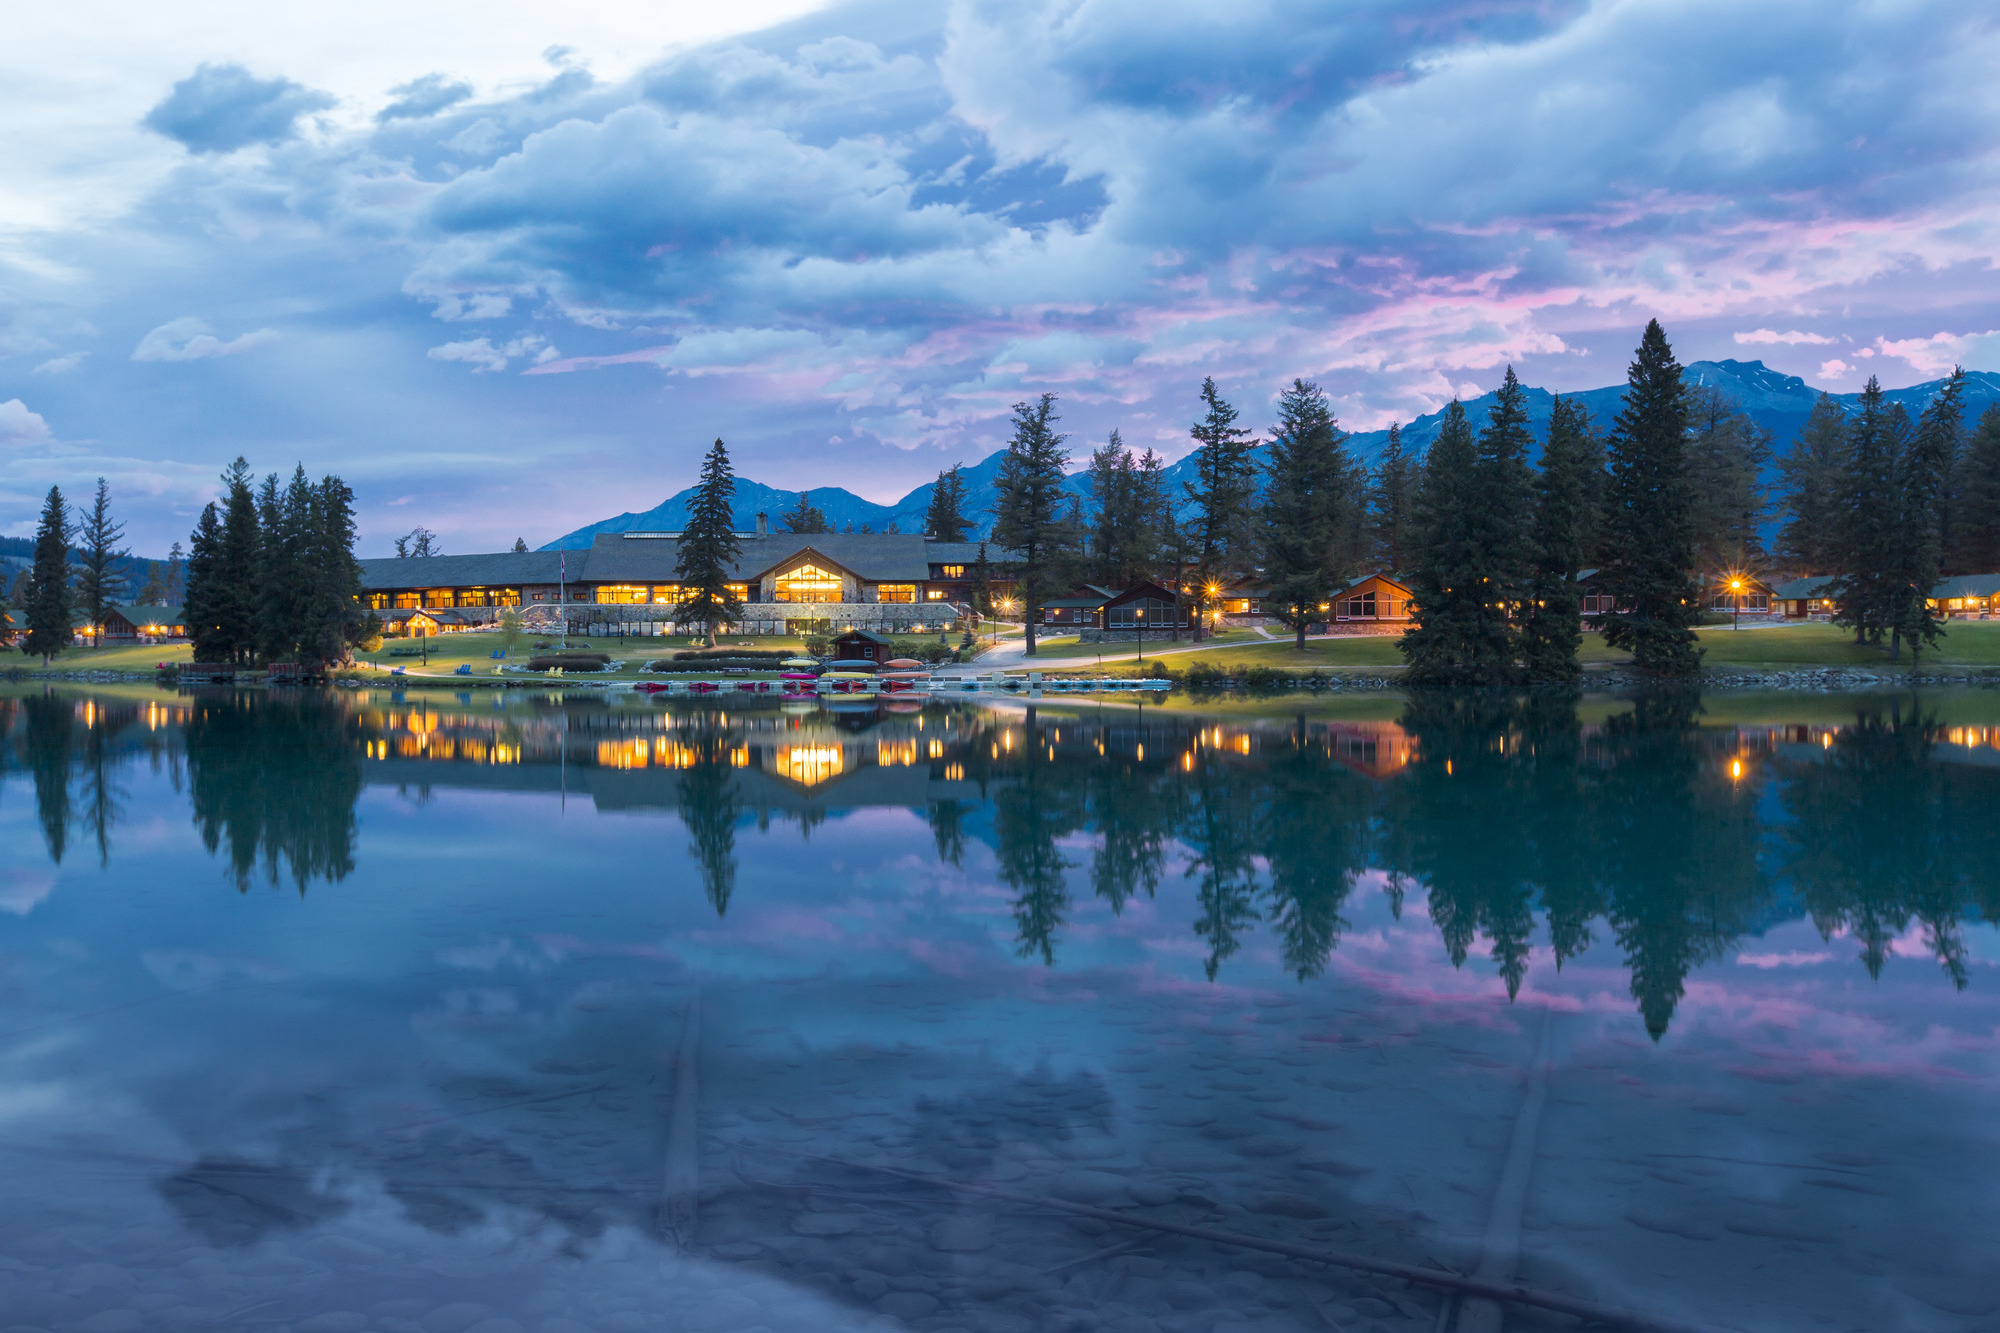 Jasper Park Lodge is seen from across the lake with a colourful sky